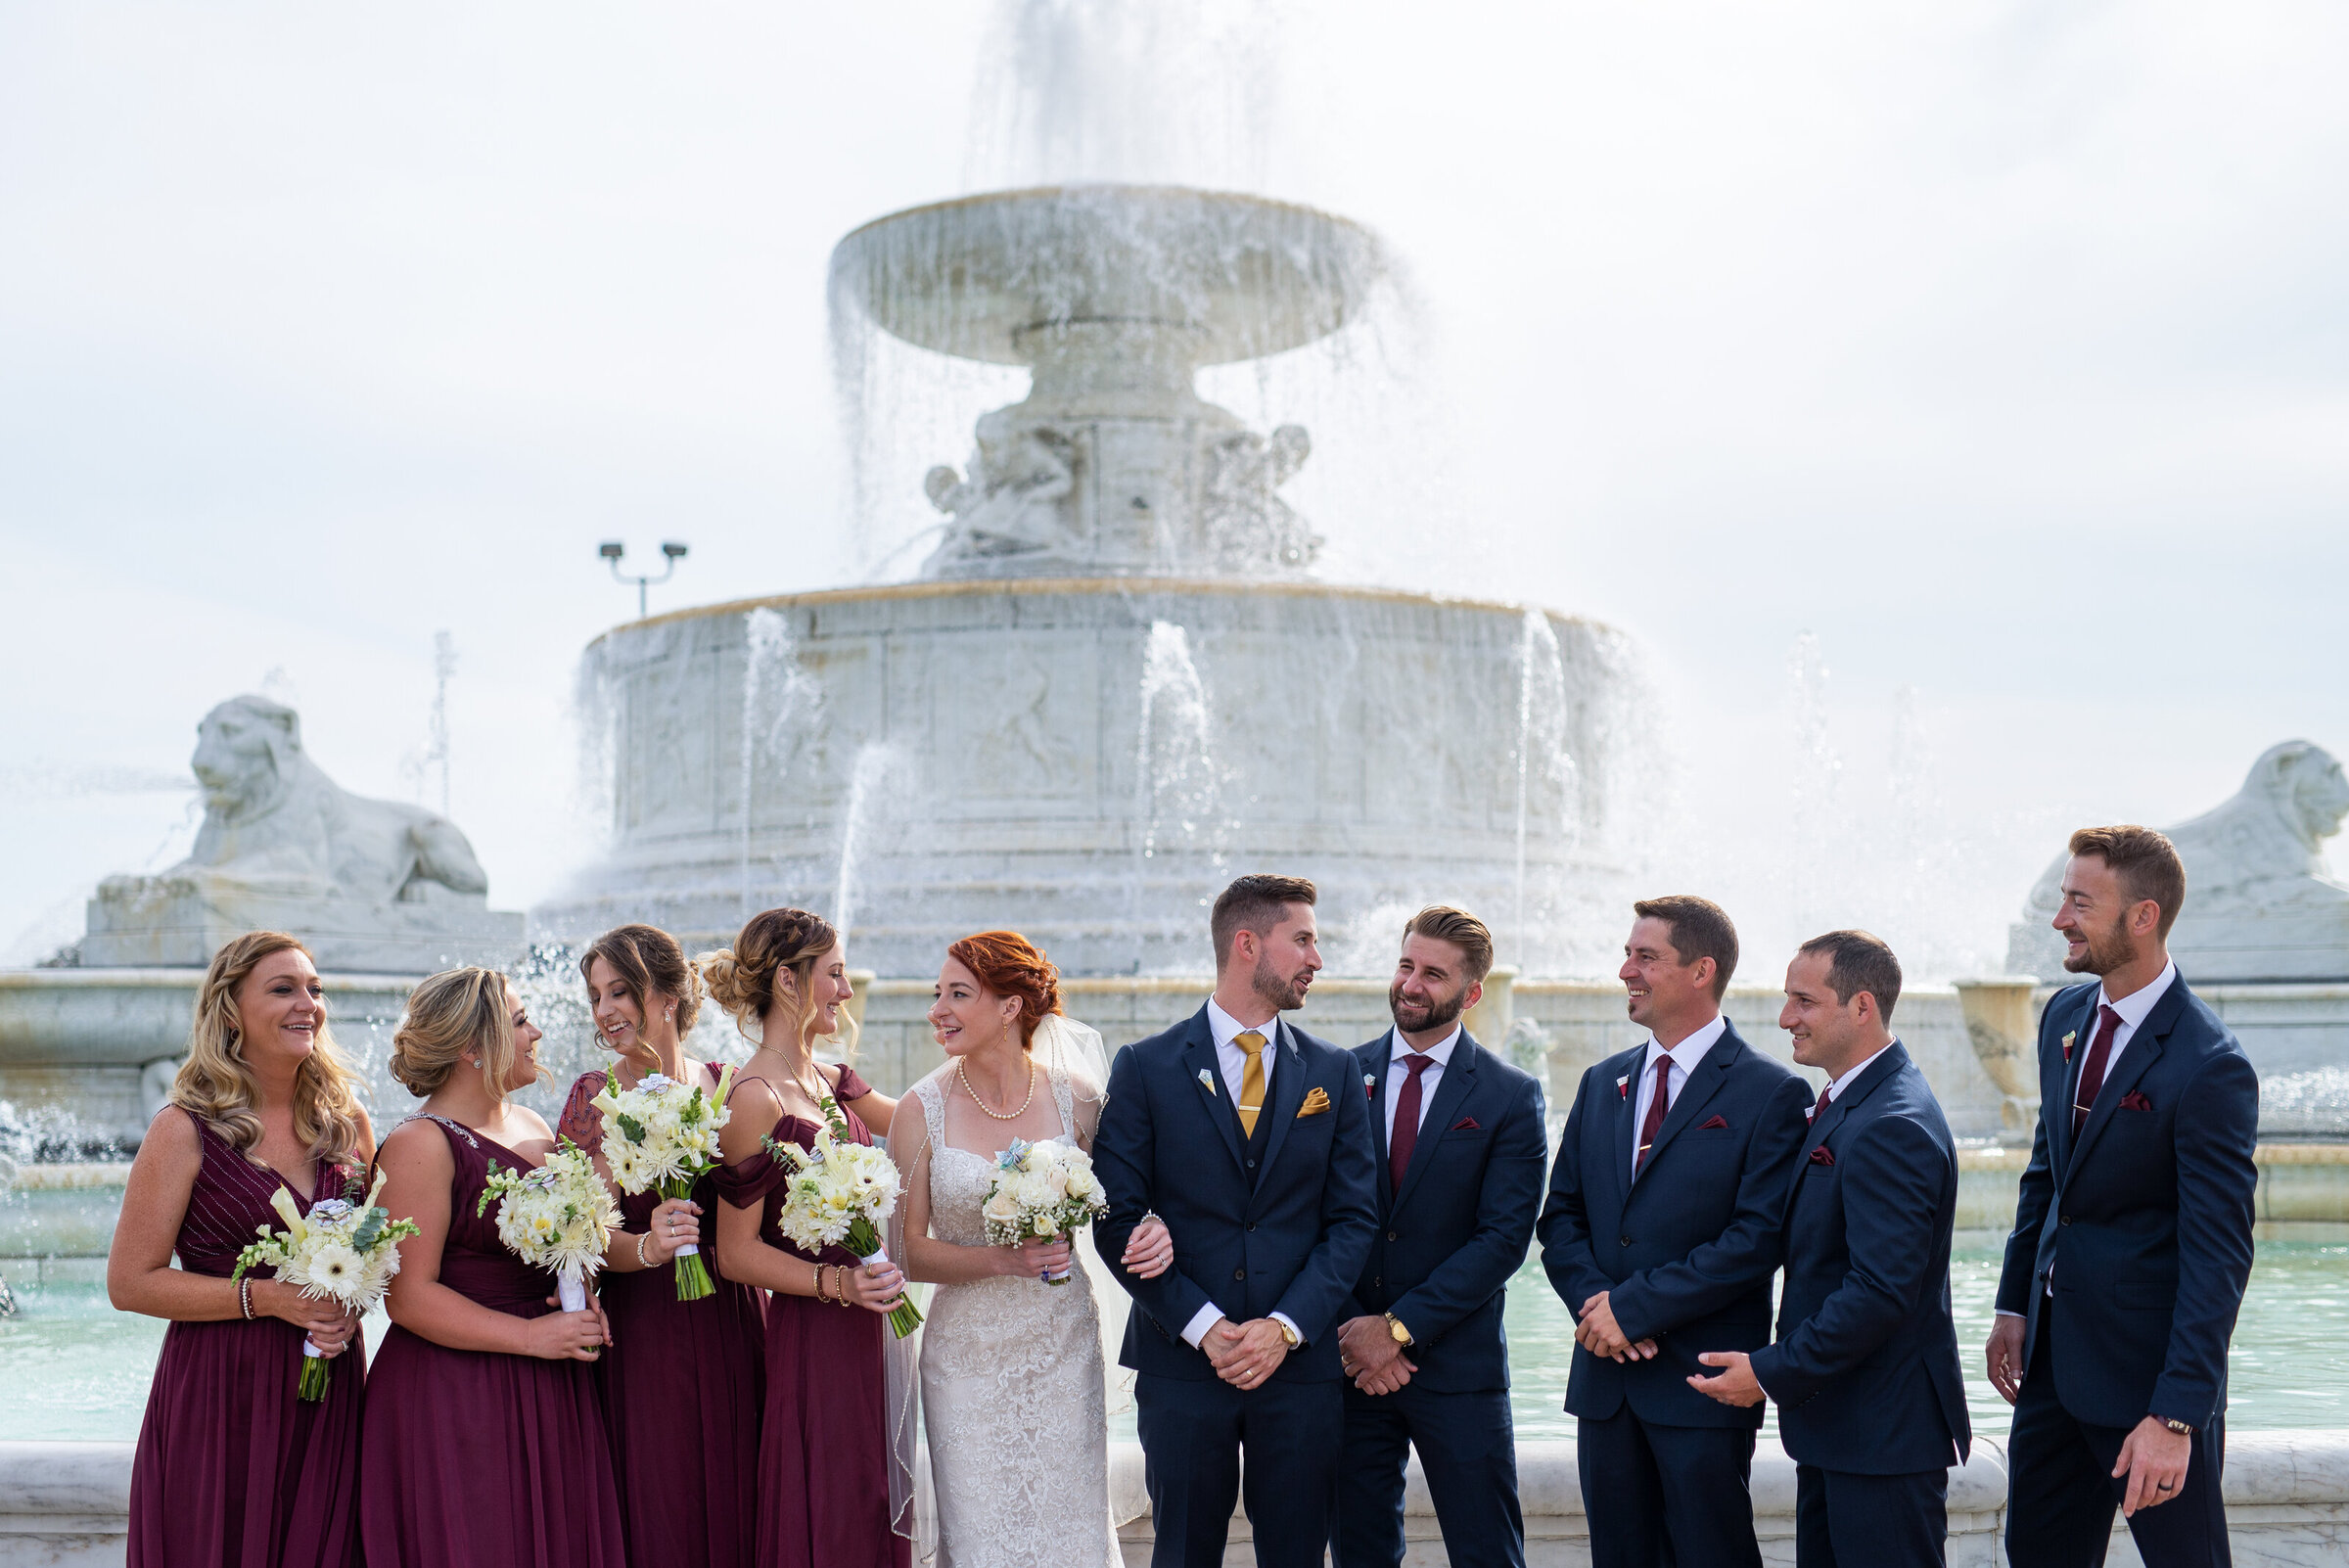 Wedding party standing and laughing in front of the Belle Isle fountain, in Detroit Michigan.